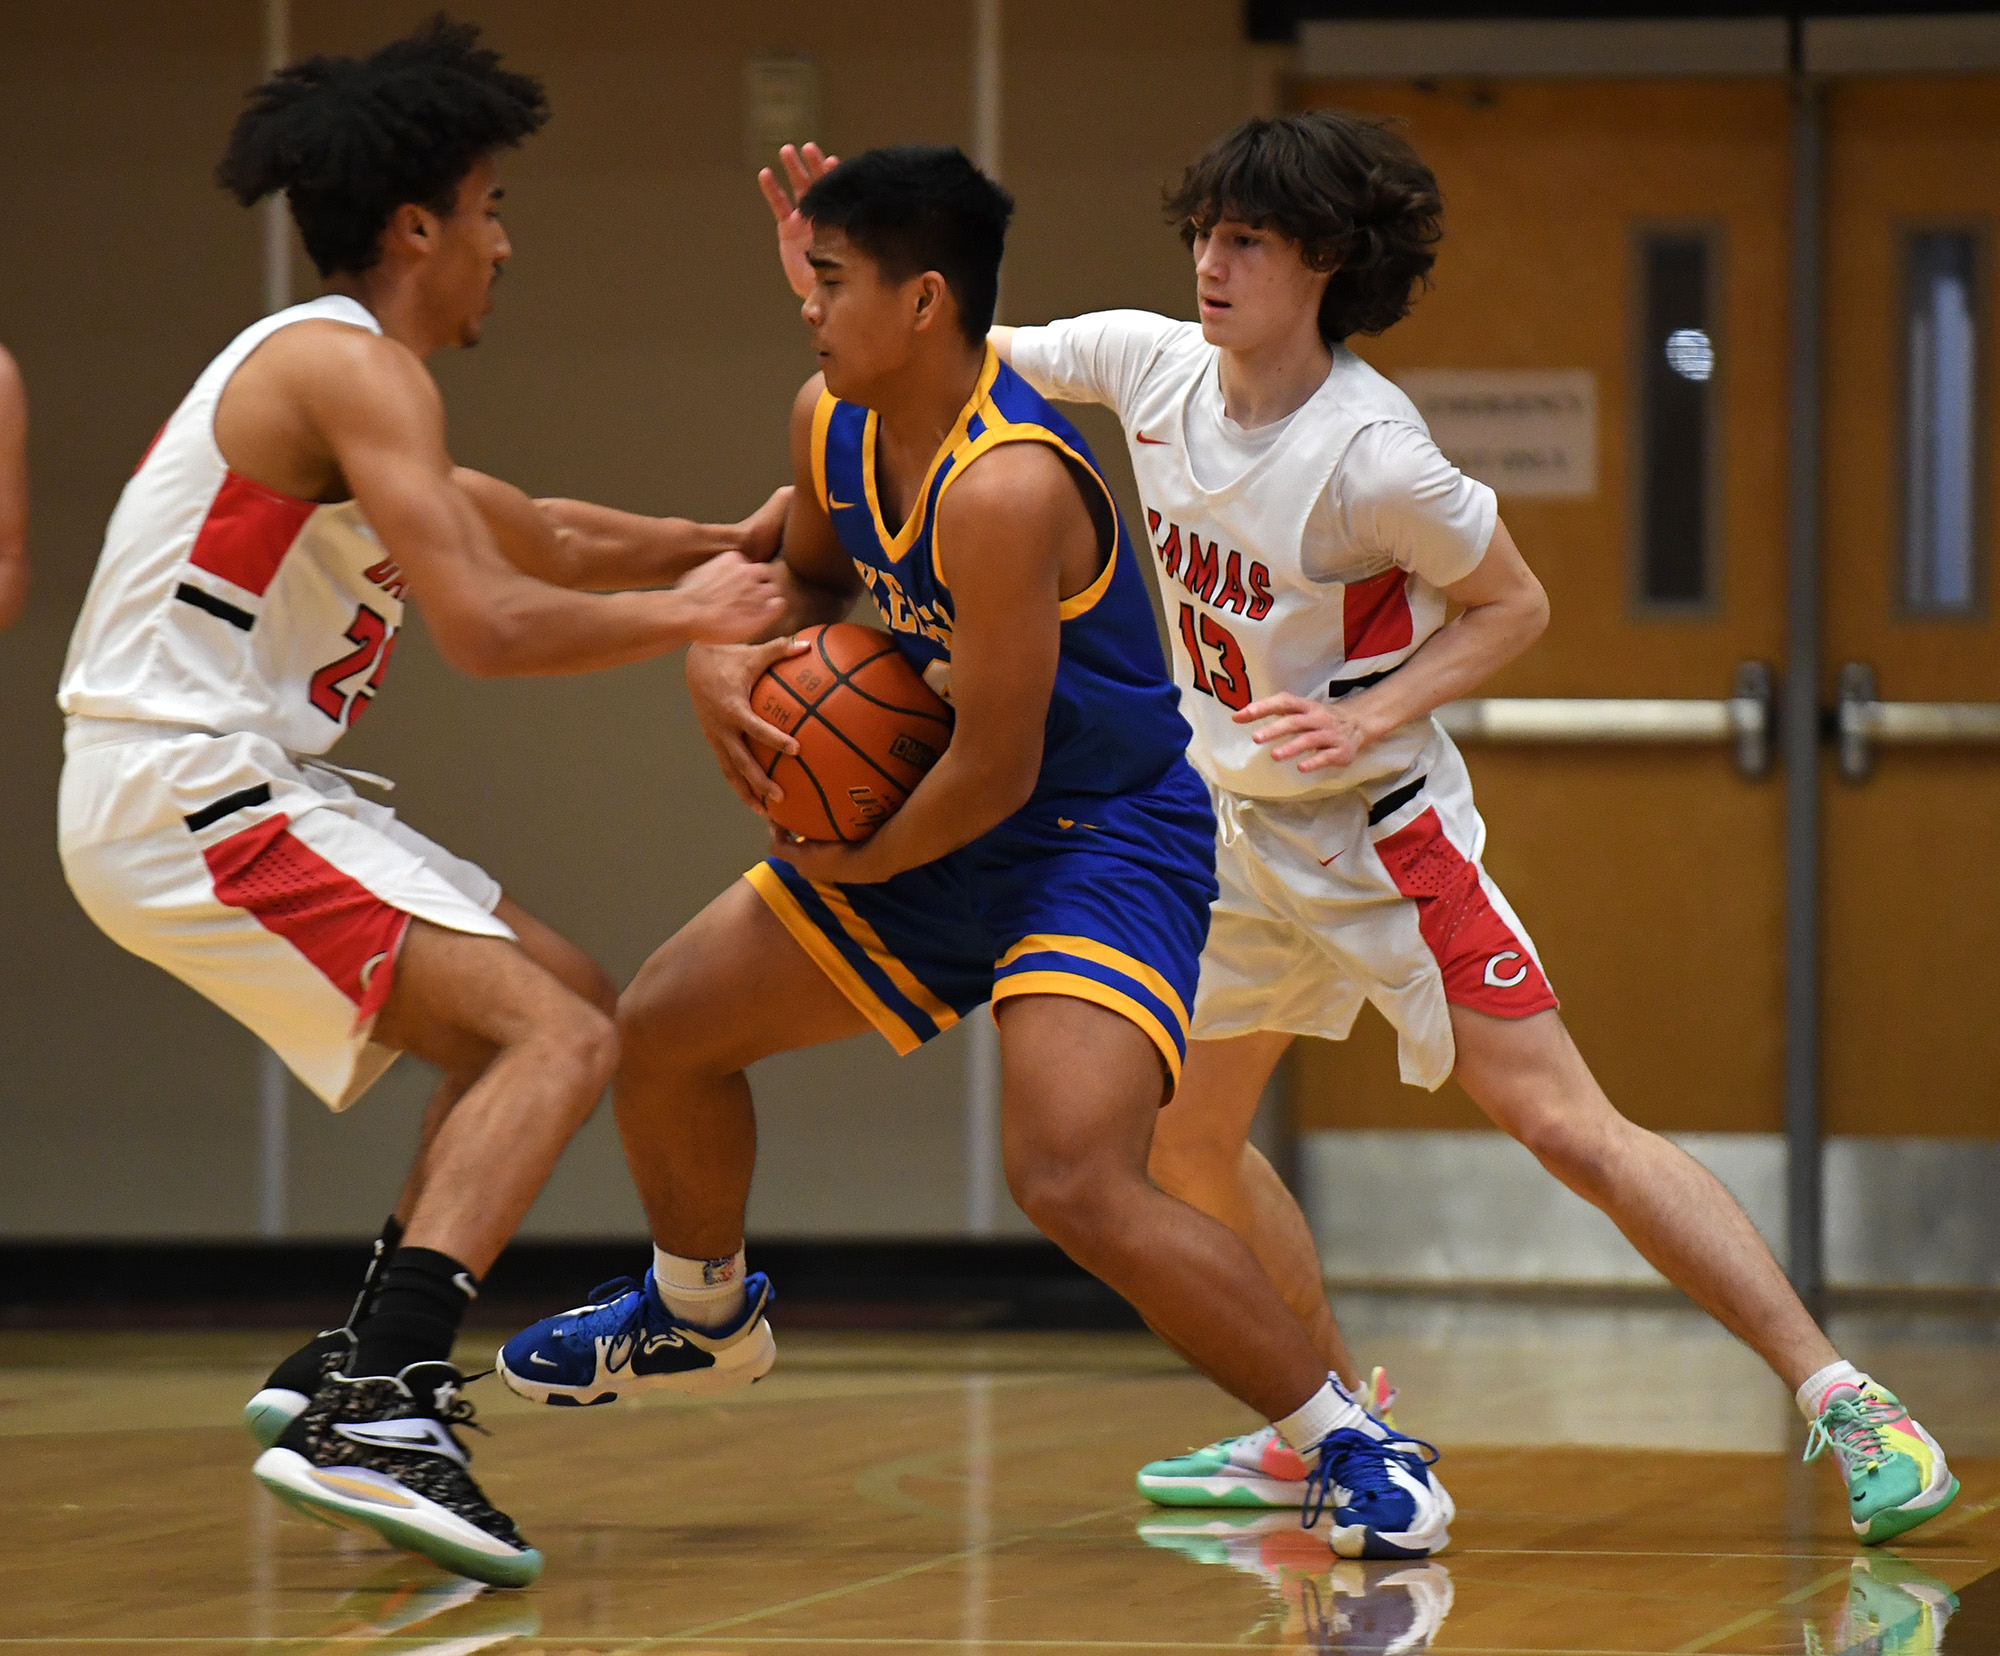 Kelso junior Naiser Lukas, center, protects the ball while Camas senior Quentin Allen, left, goes for a steal Friday, Jan. 21, 2022, during the Hilanders’ 83-38 loss to the Papermakers at Camas High School.